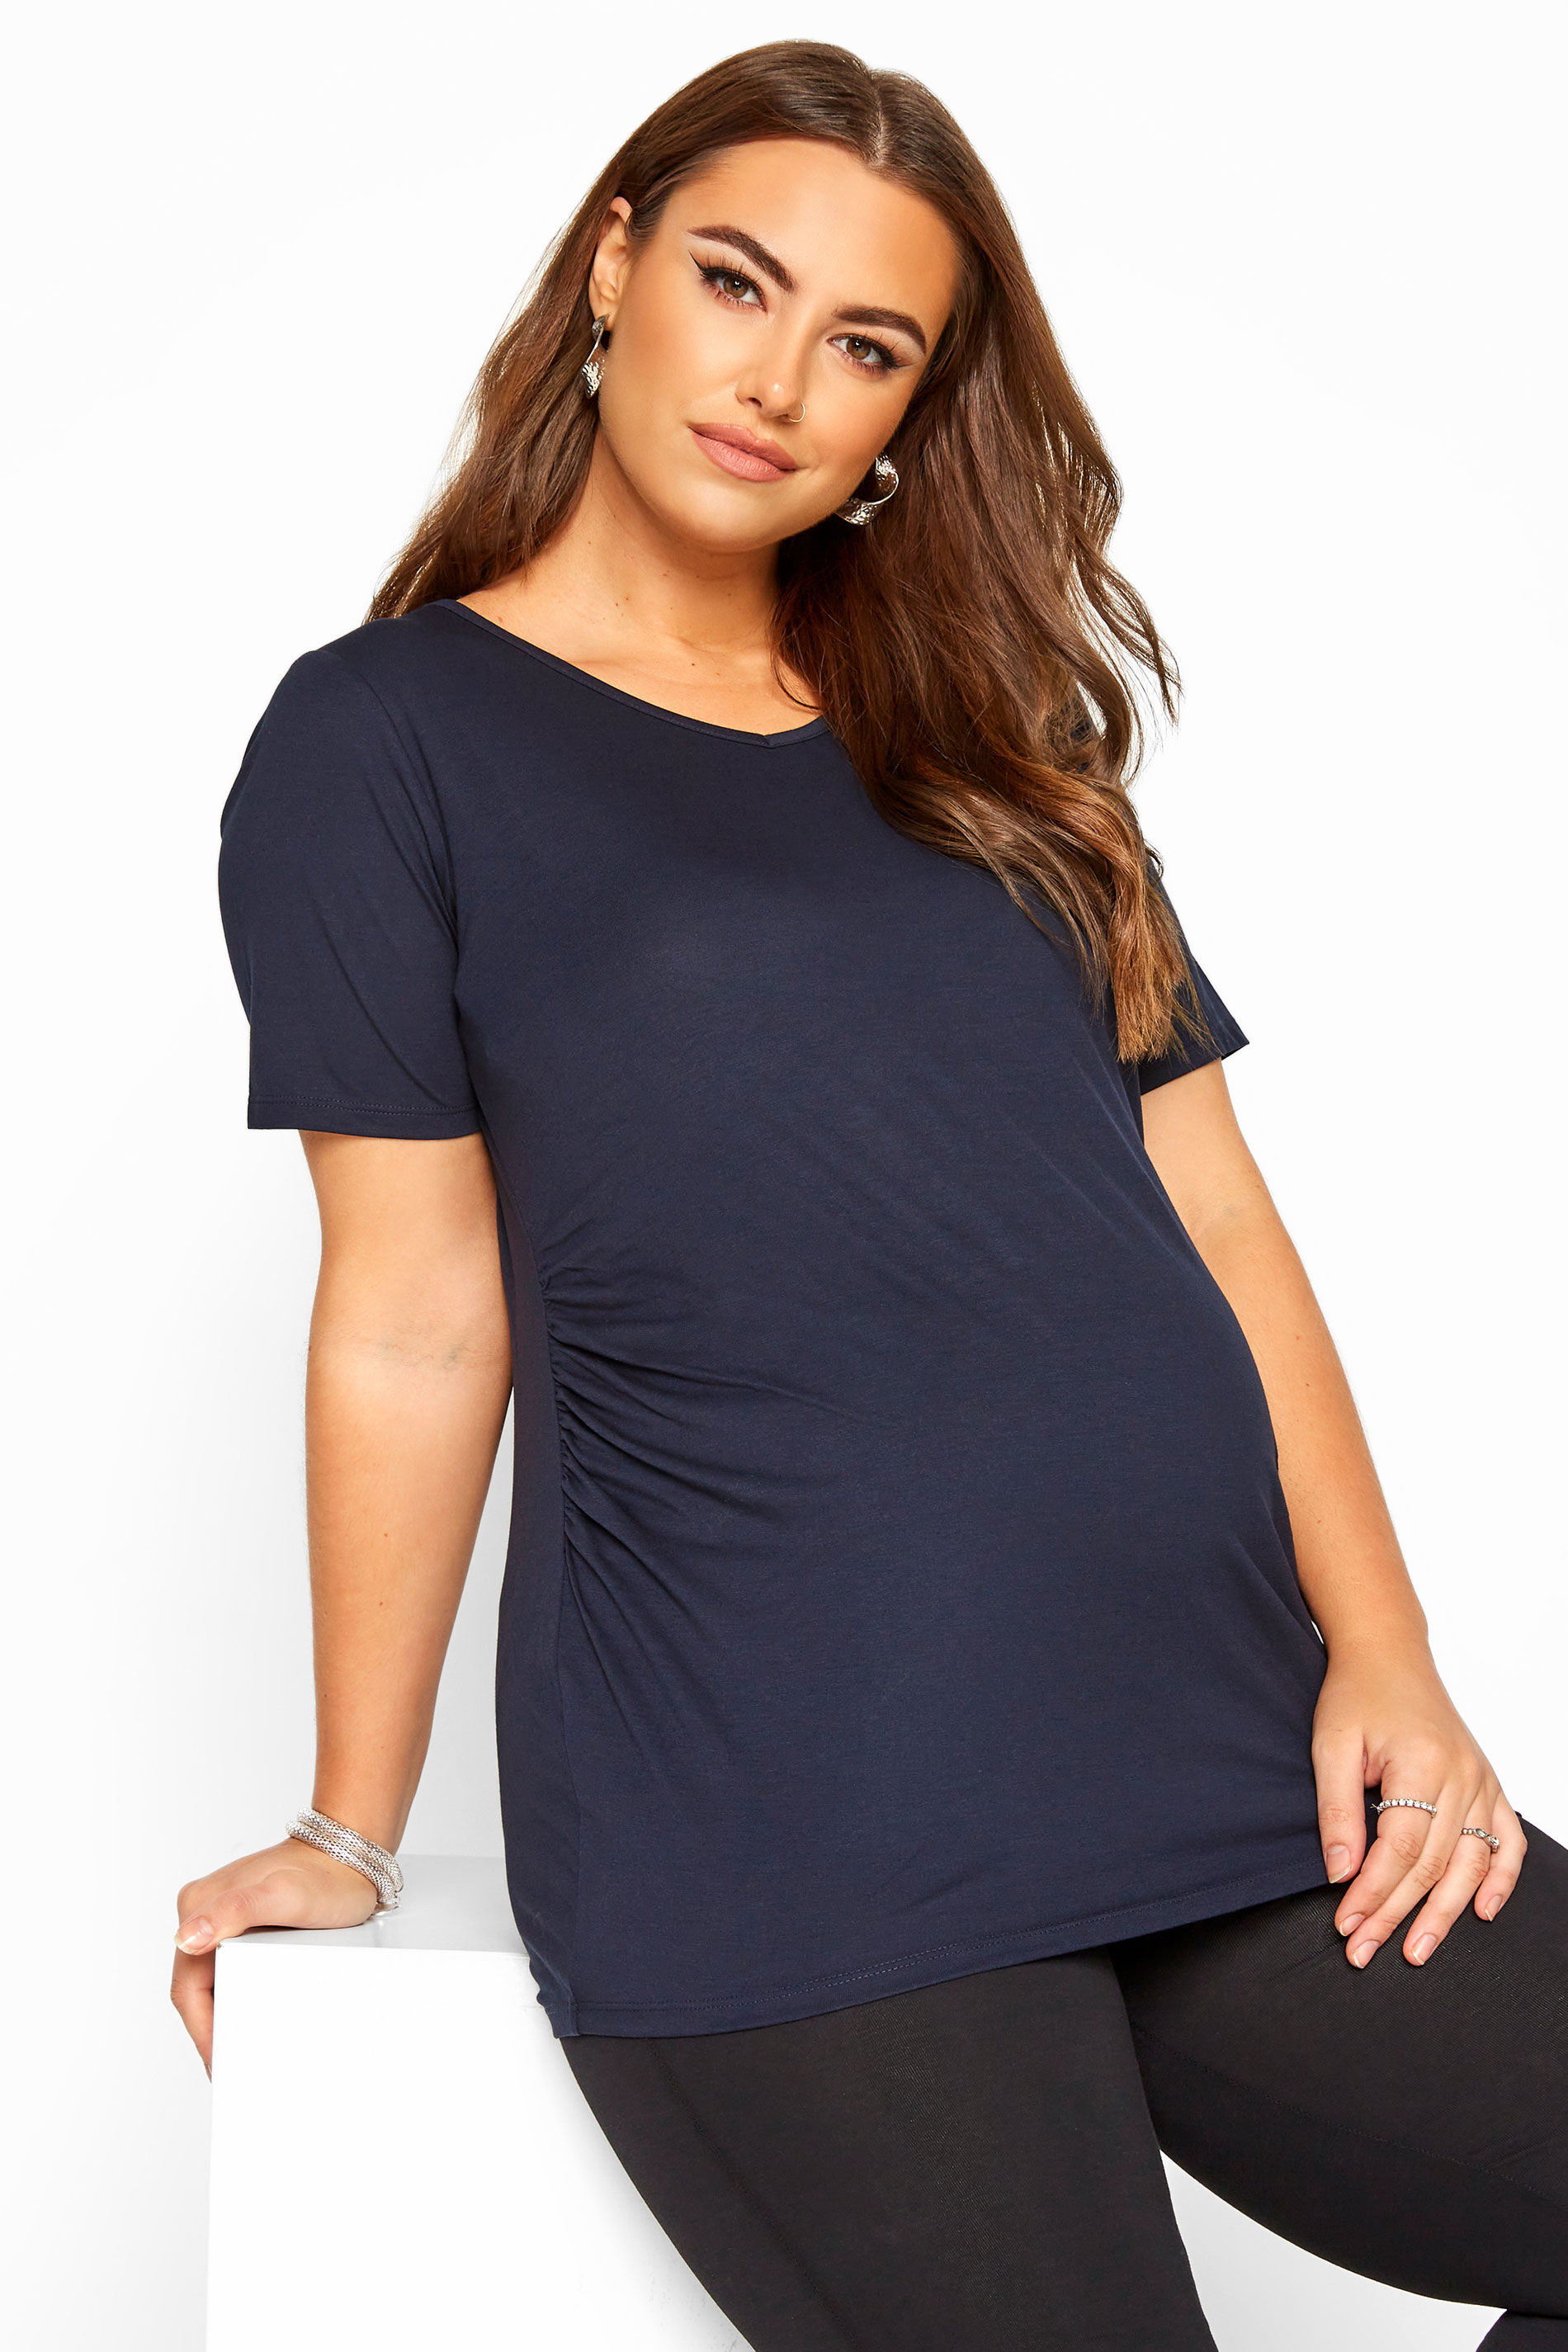 Yours Clothing Bump it up maternity navy vneck tshirt